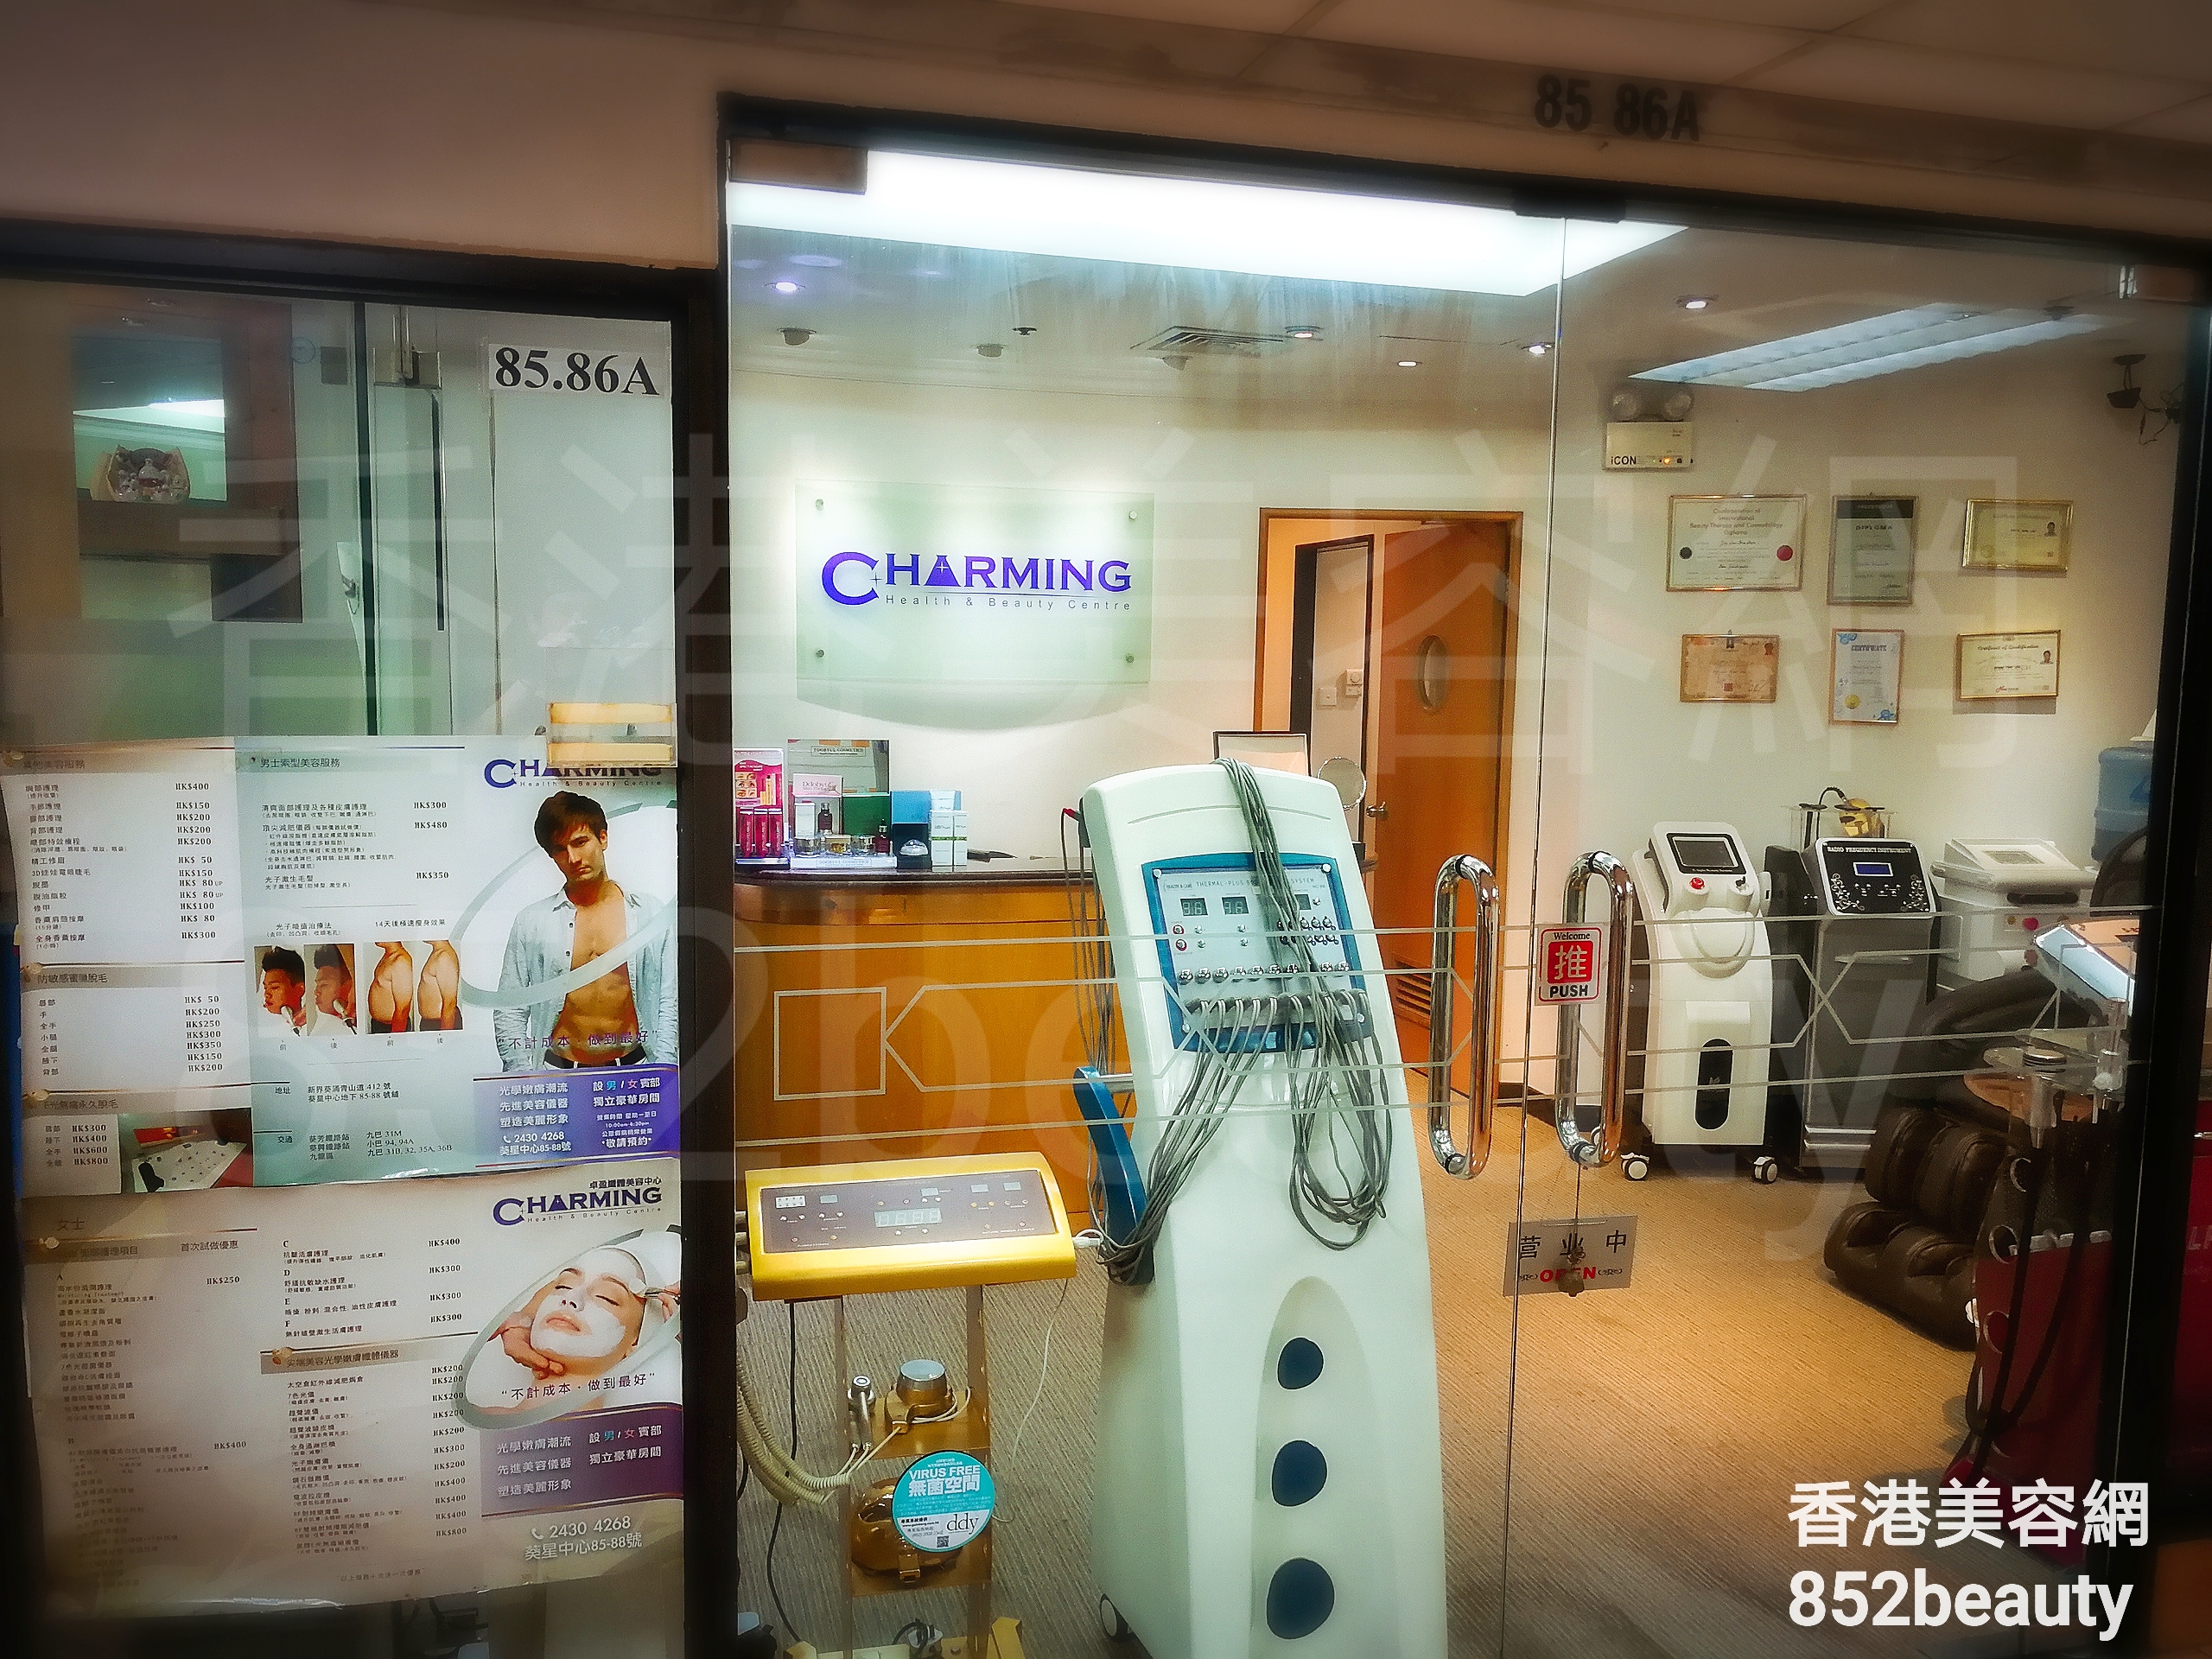 Hand and foot care: Charming Health & Beauty Centre